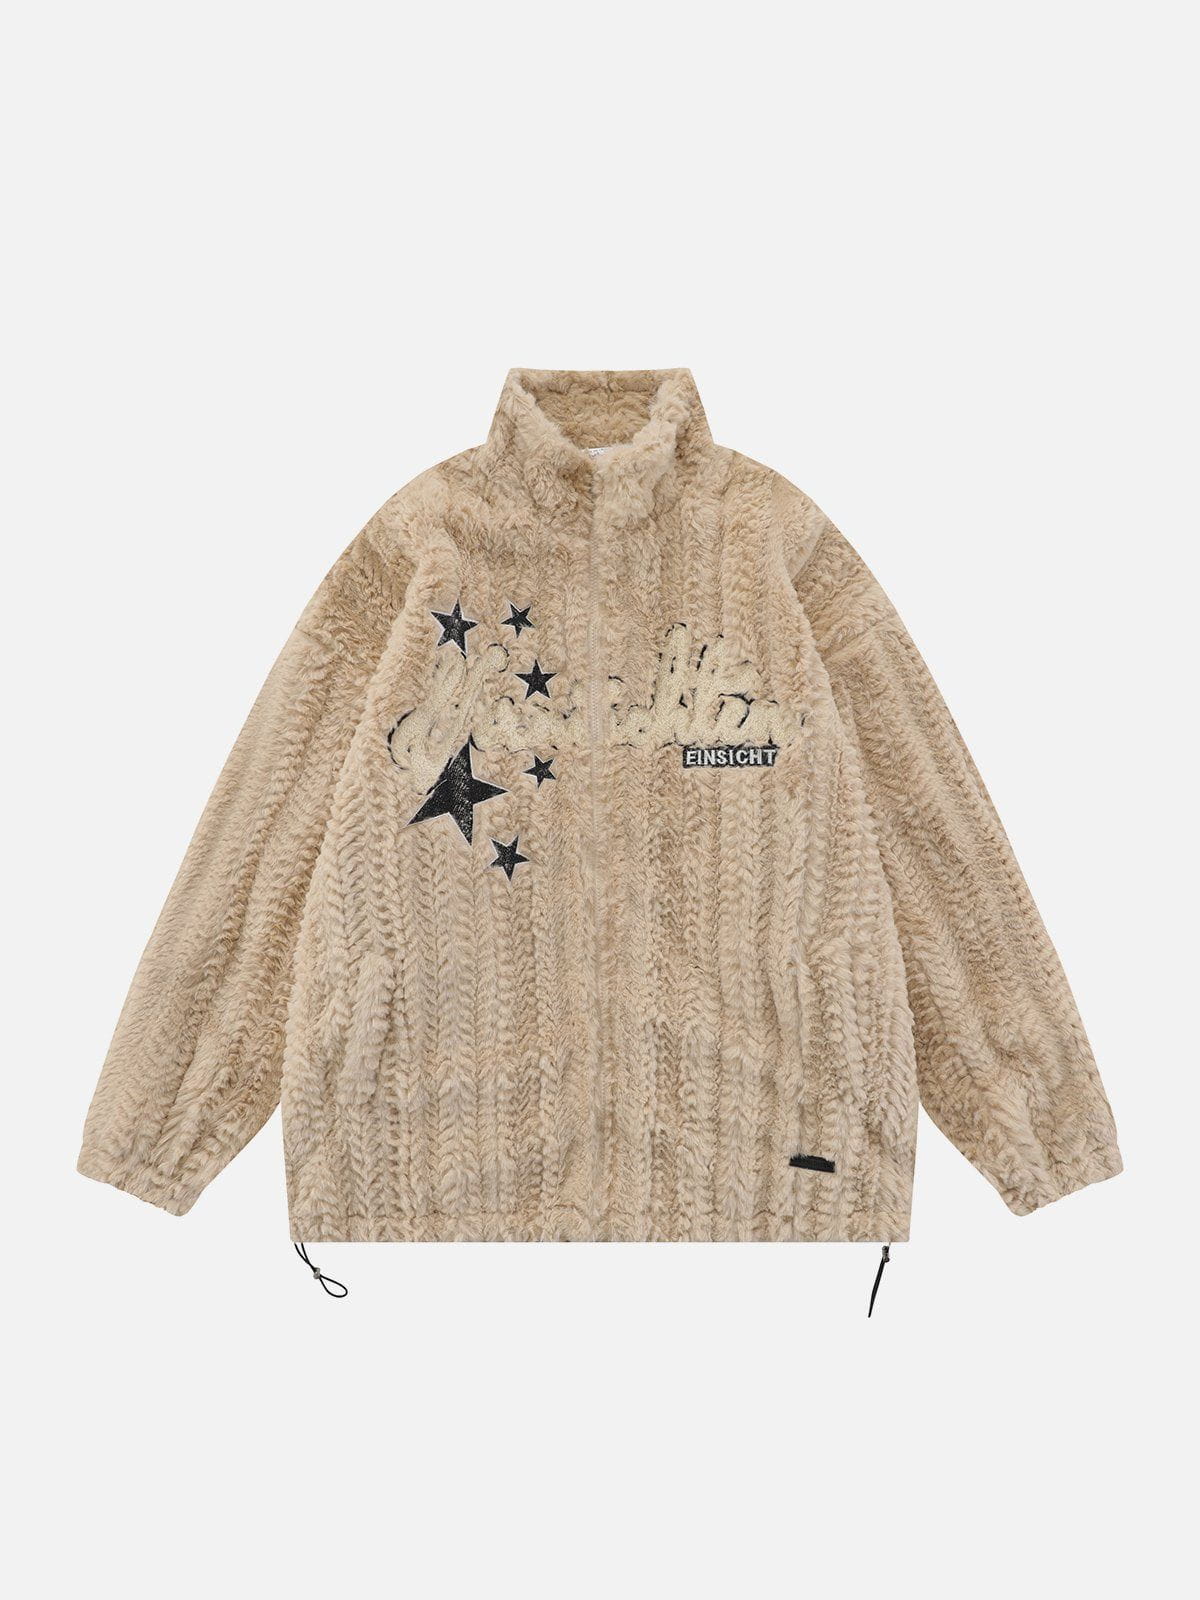 Sneakerland™ - Solid Star Embroidered Sherpa Coat